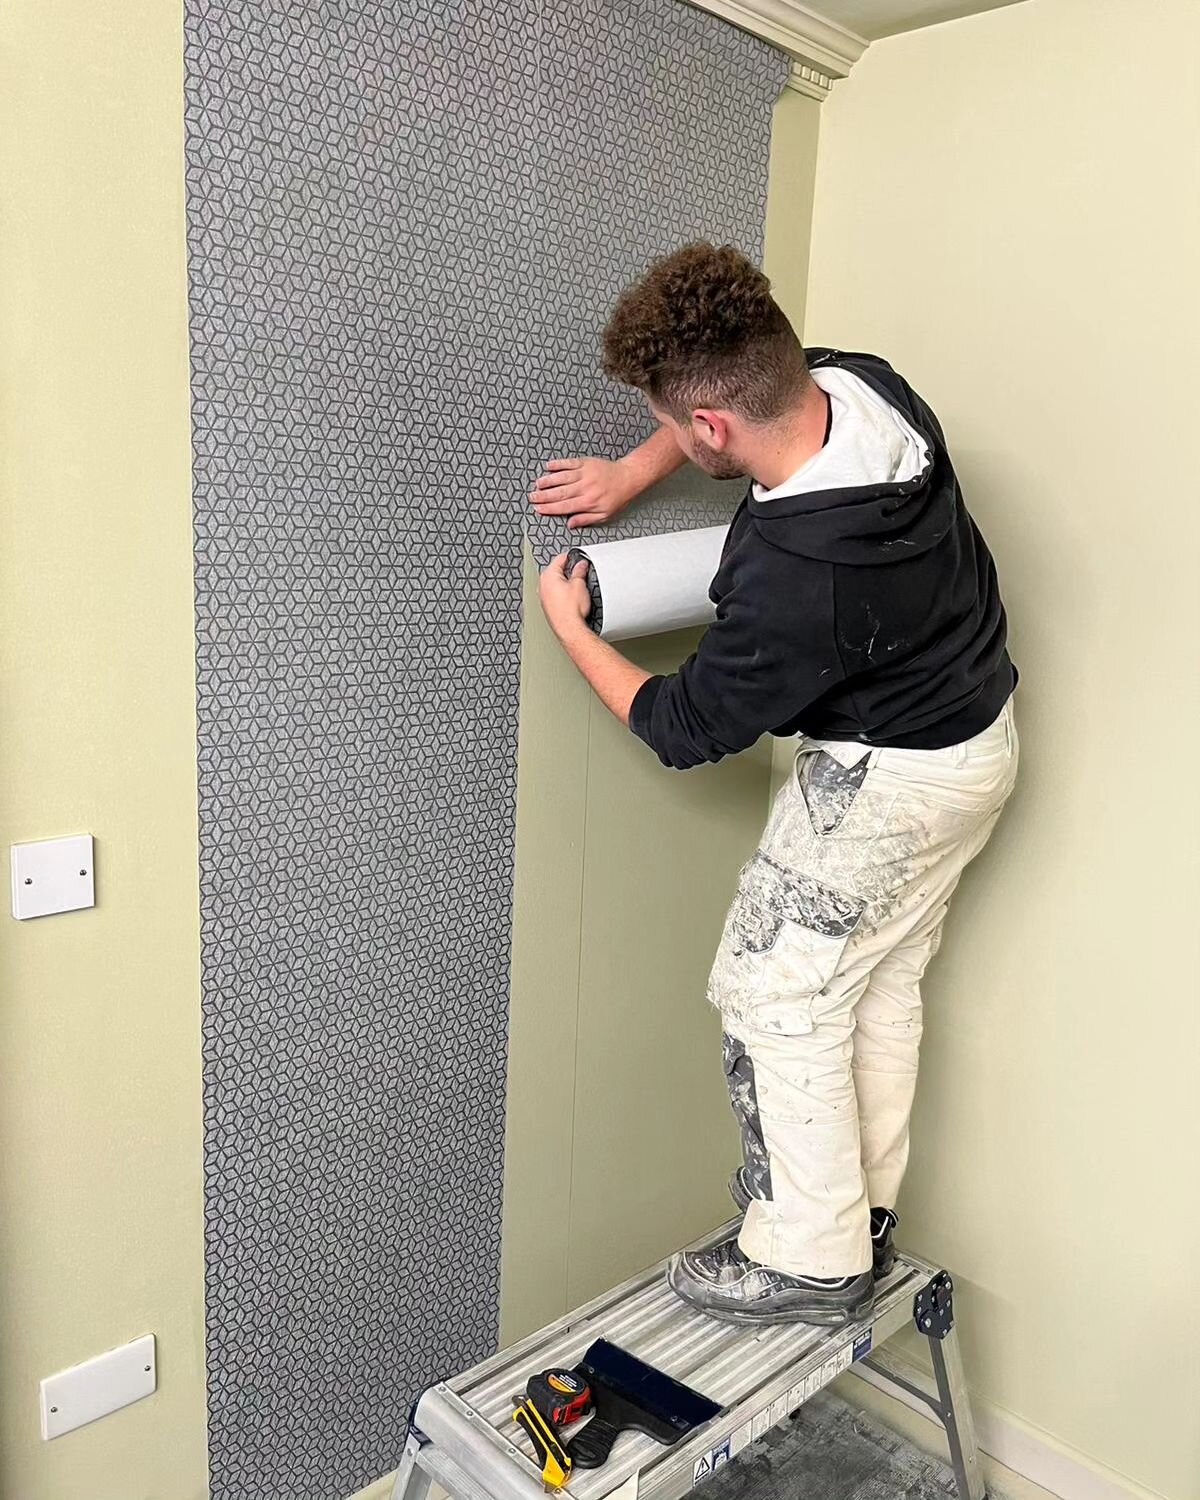 Our 4 apprentices spent the day at the @duluxdecoratorcentre academy in Newport.
The 1st of 3 courses to improve their wallpapering skills.
A top day and lots learnt.